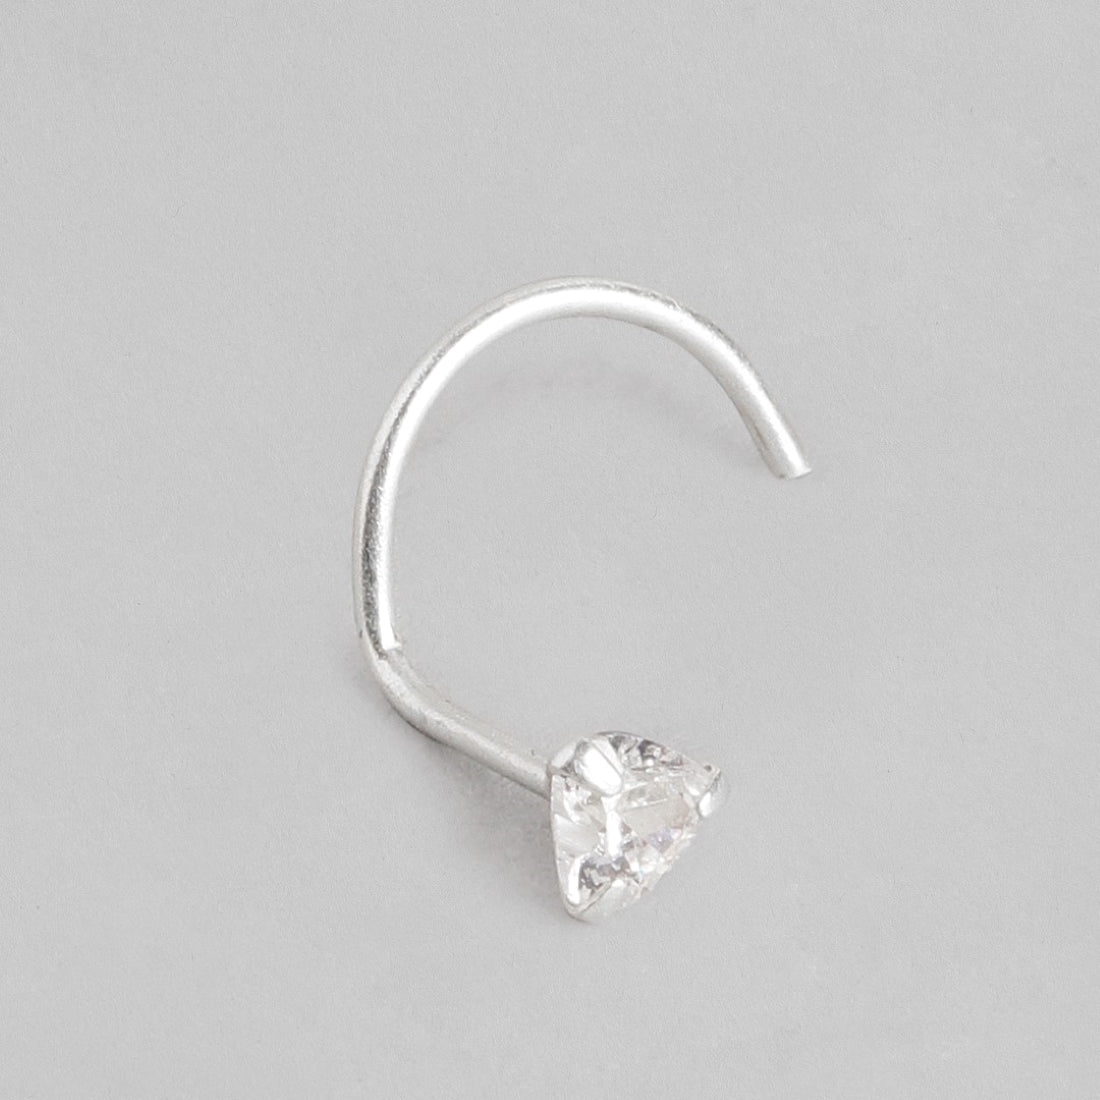 Tiny Heart Solitaire 925 Silver Nose Pin